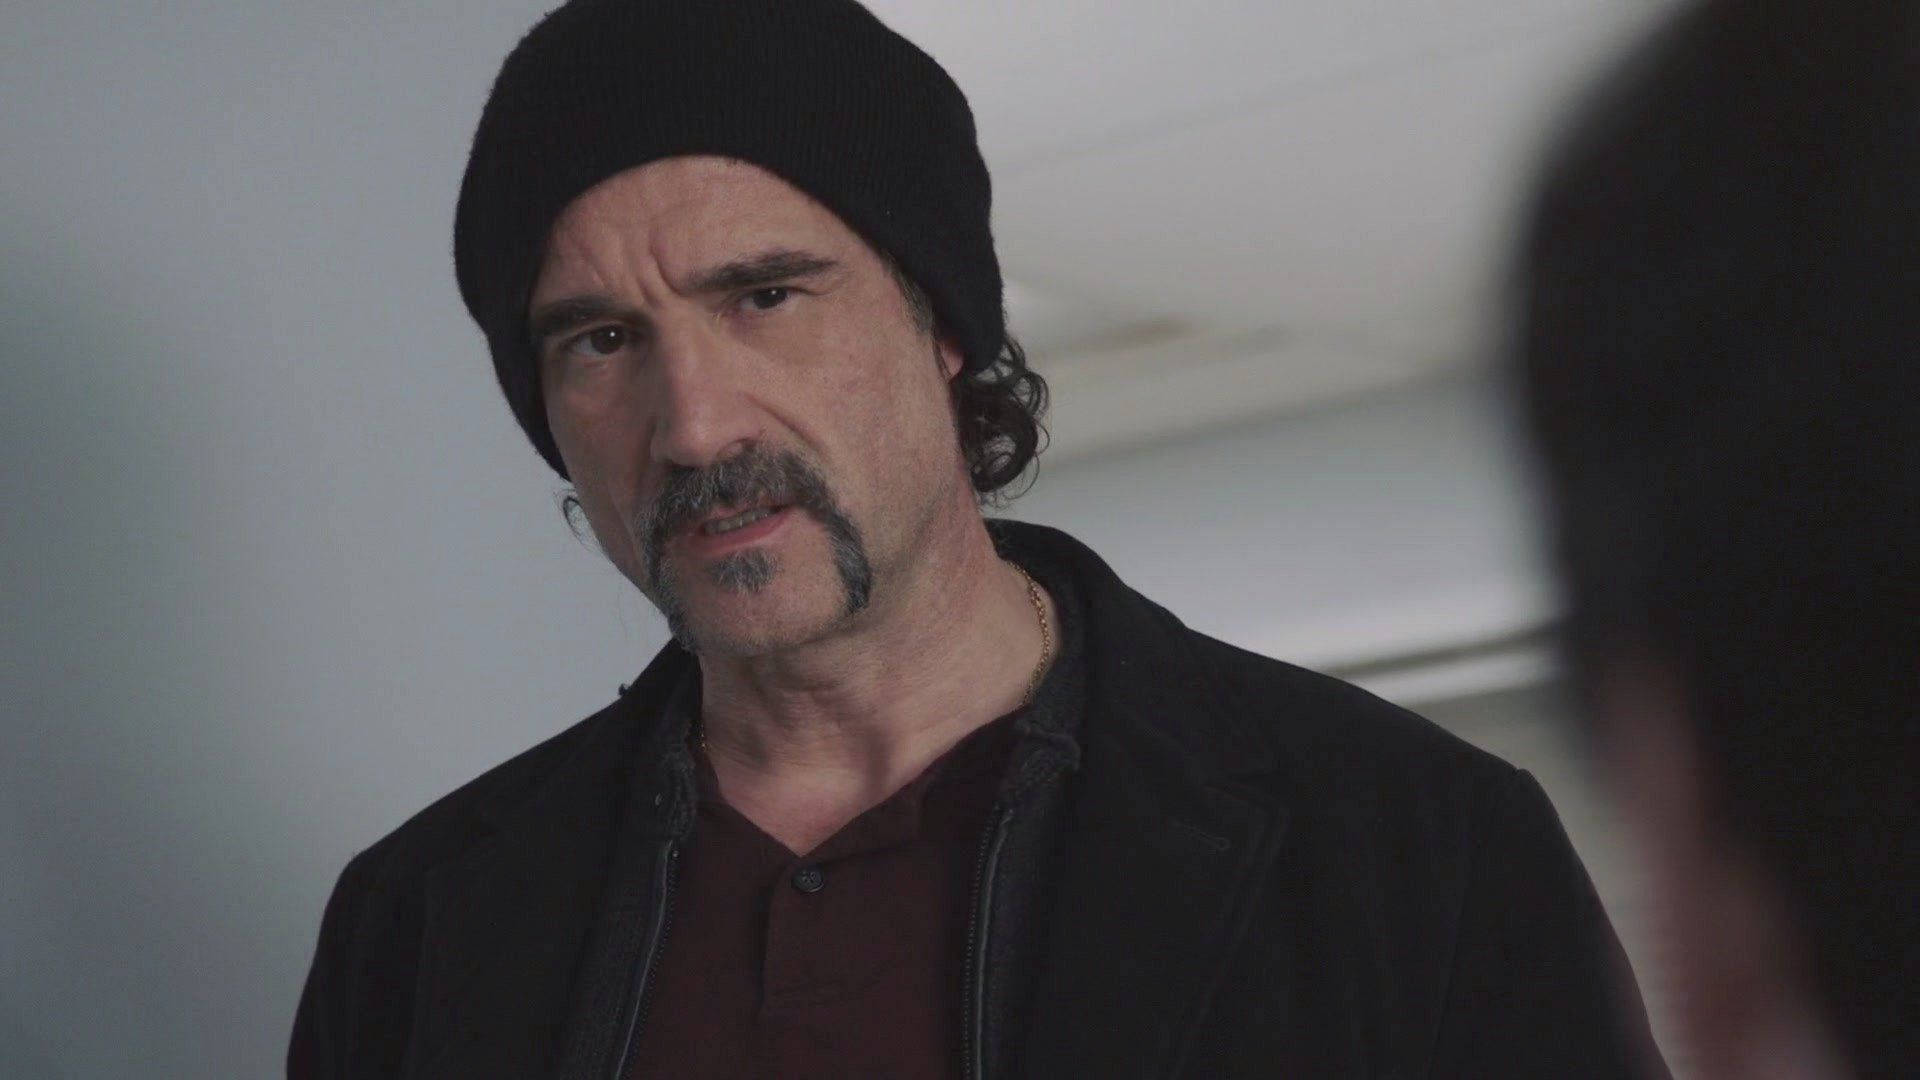 Beanieelias Koteas Is An English Actor Known For His Roles In Film And Television. Sfondo